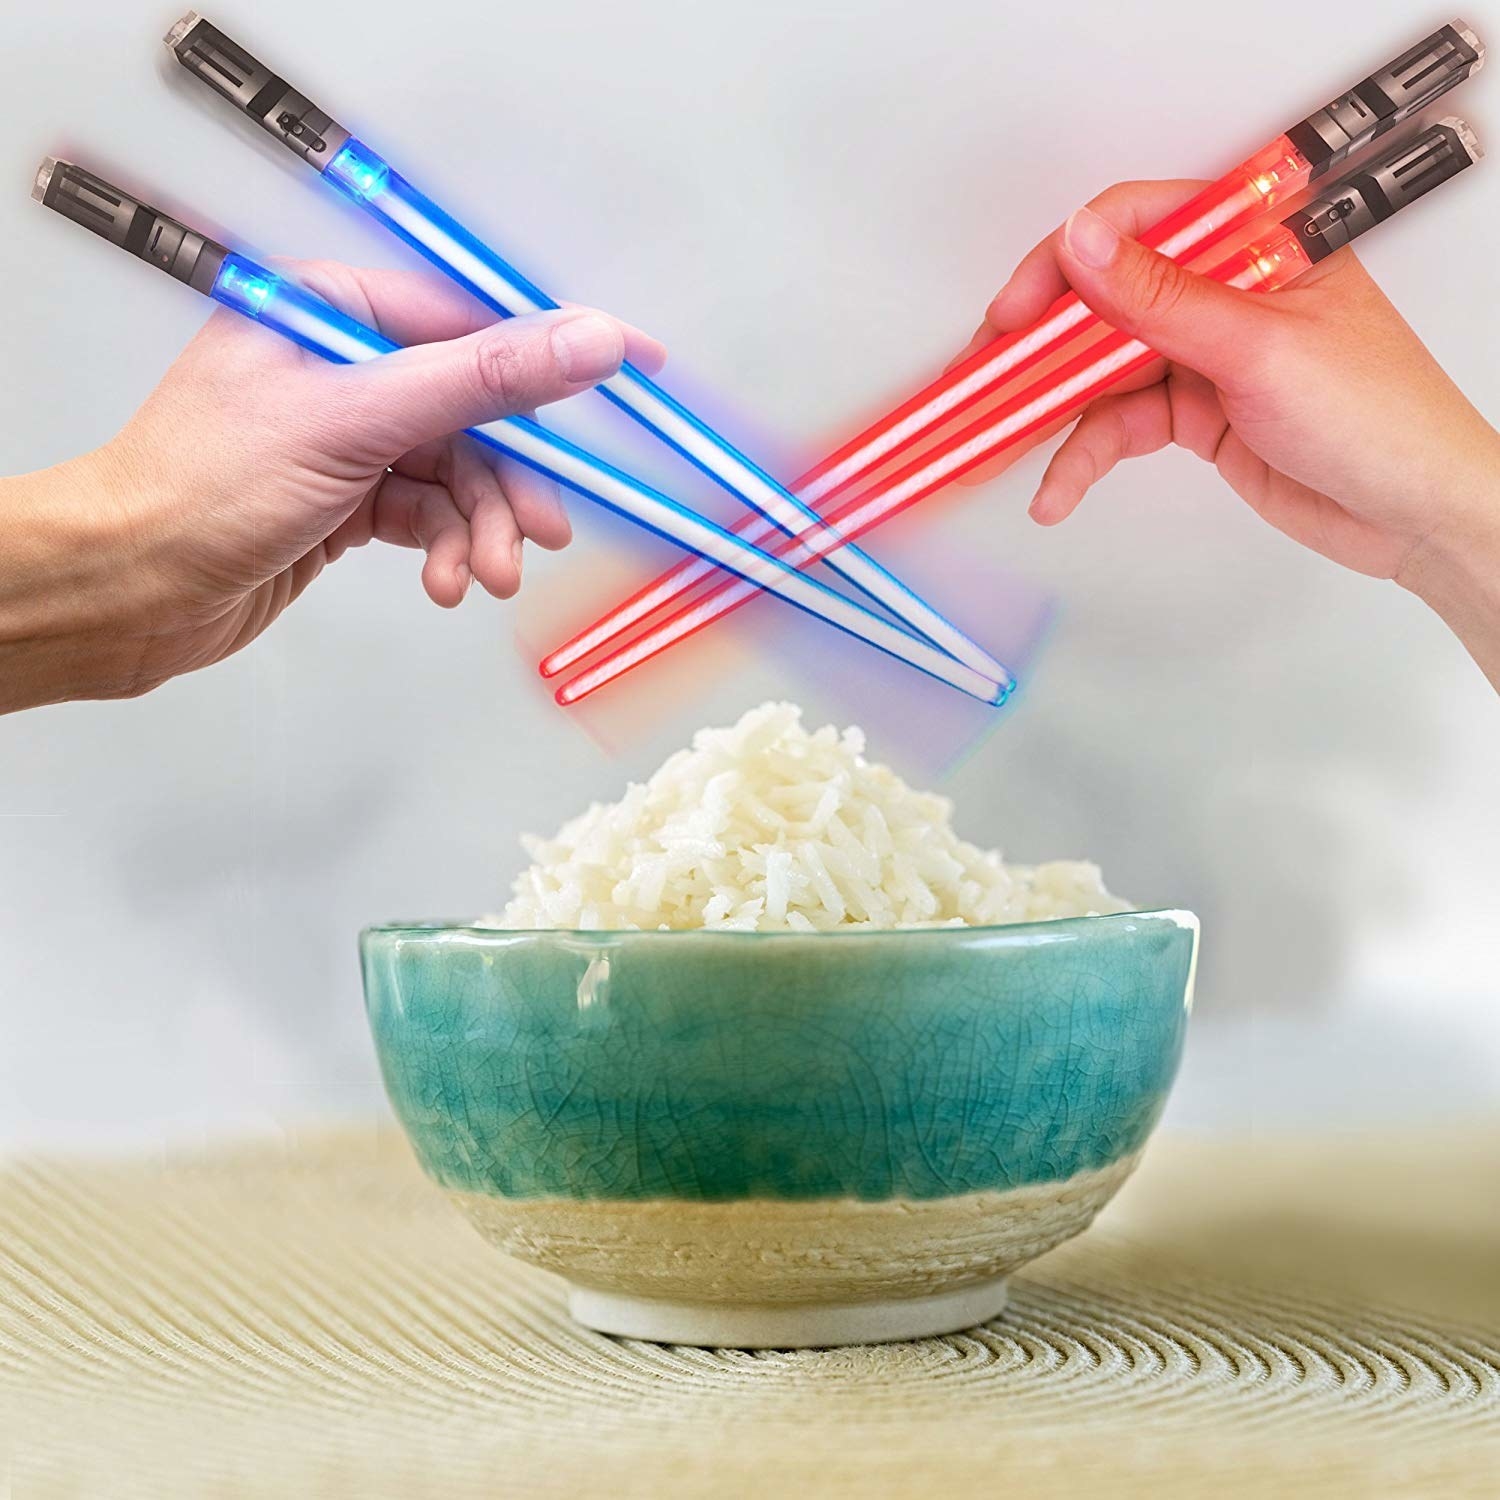 hands duel over rice with glowing chopsticks in red and blue 